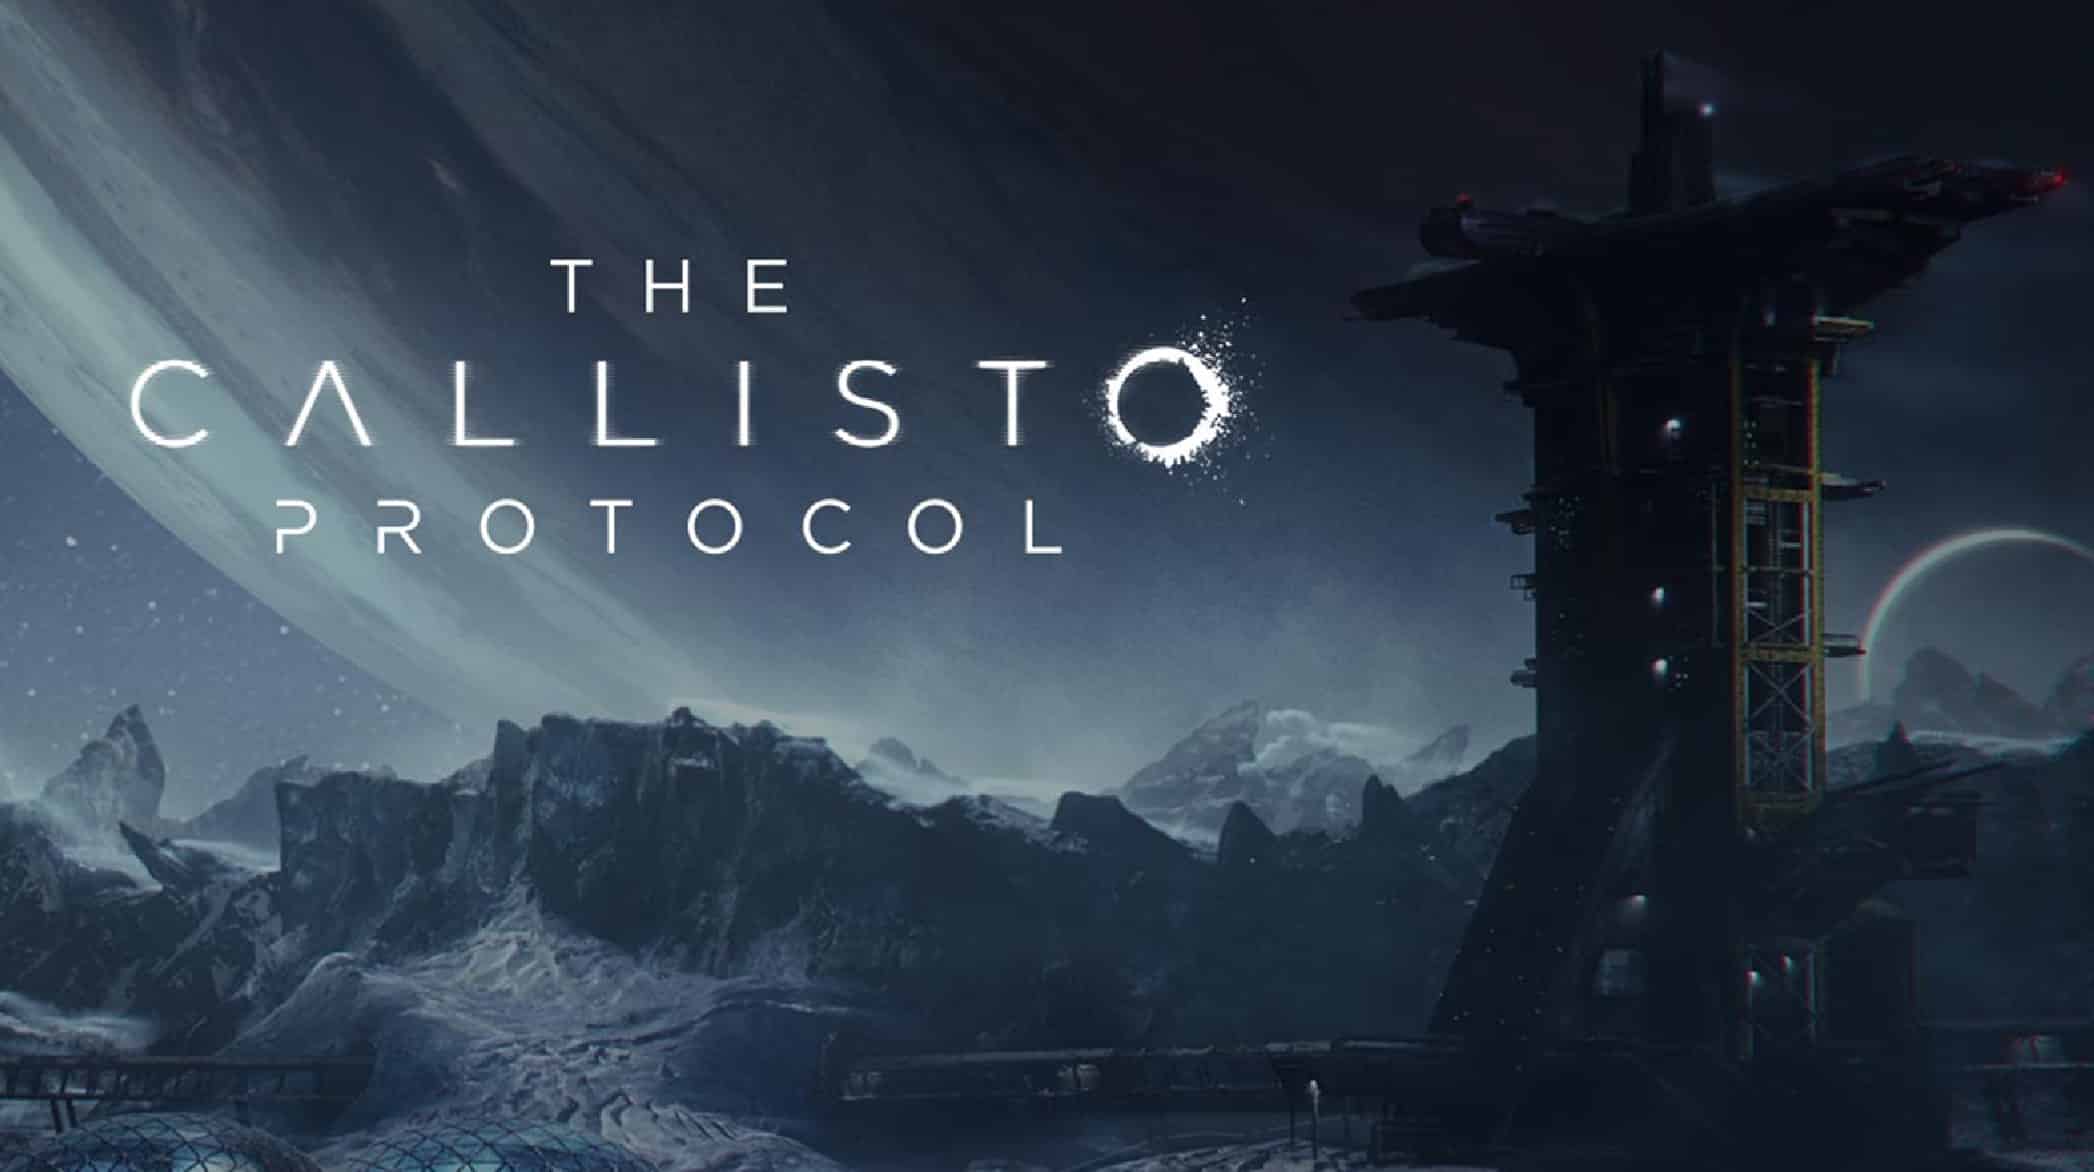 The Callisto Protocol Dev Plans Long-term Investment in the Game